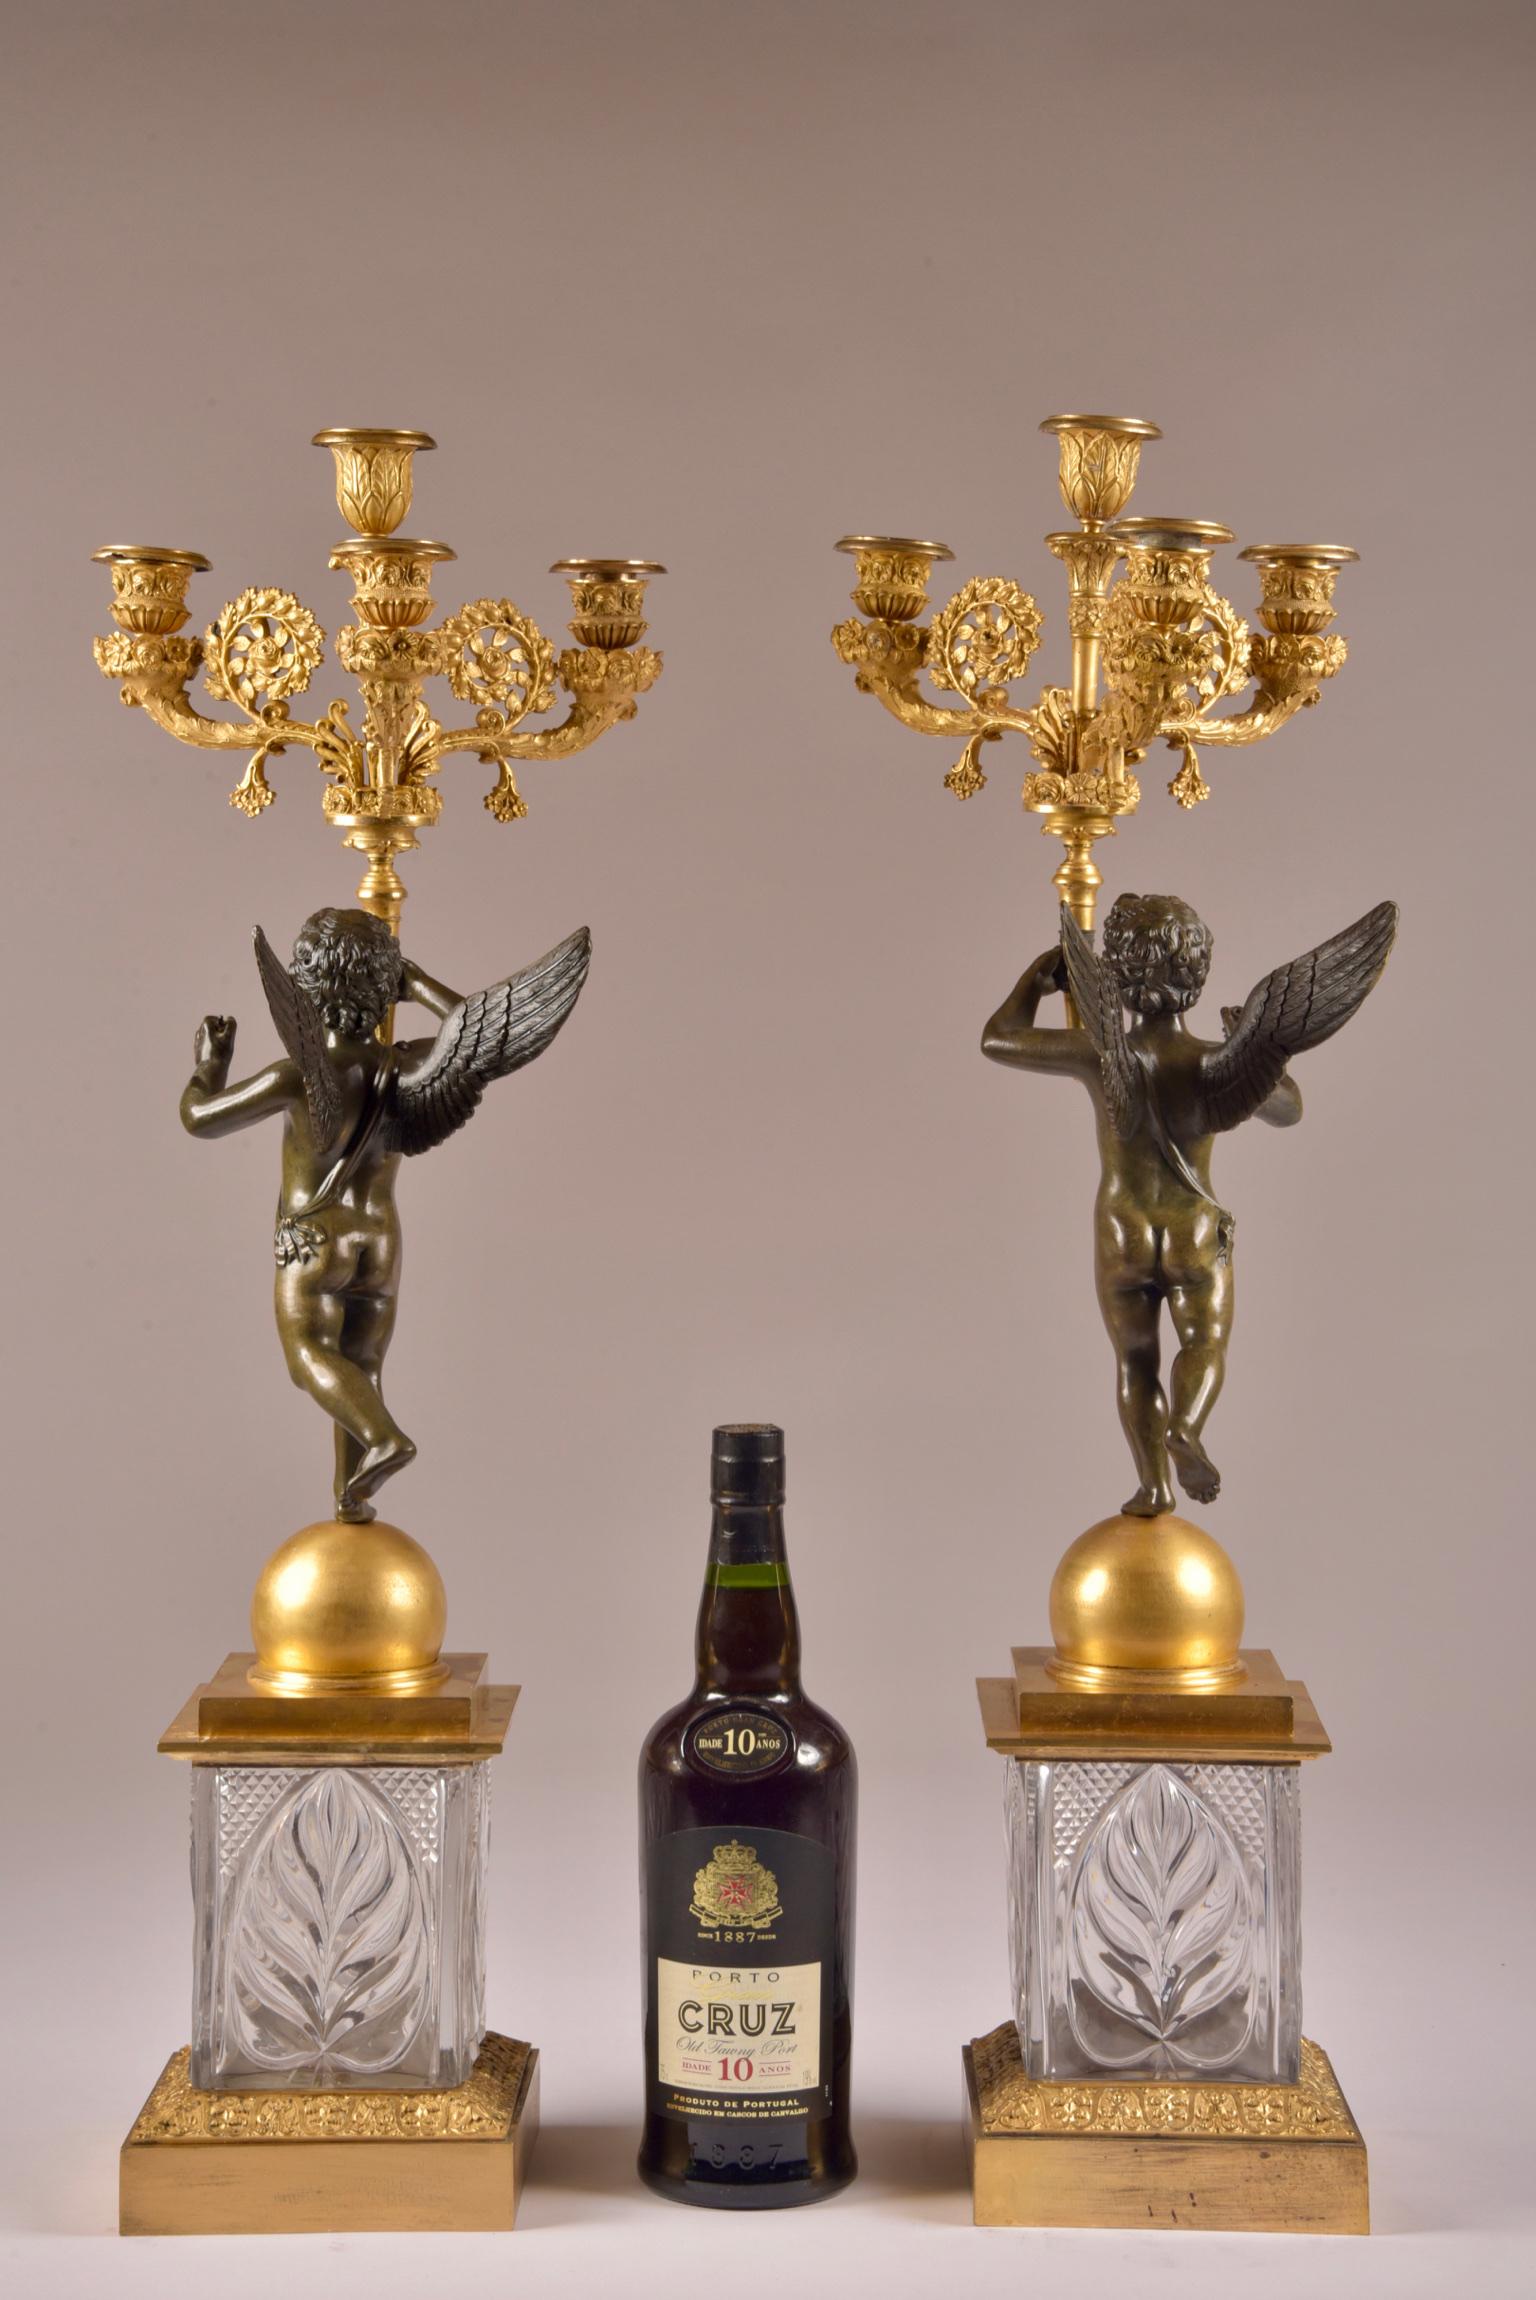 Pair of French Empire Candelabras with Putti, Superb Ormolu Candleholders, 1810  For Sale 4